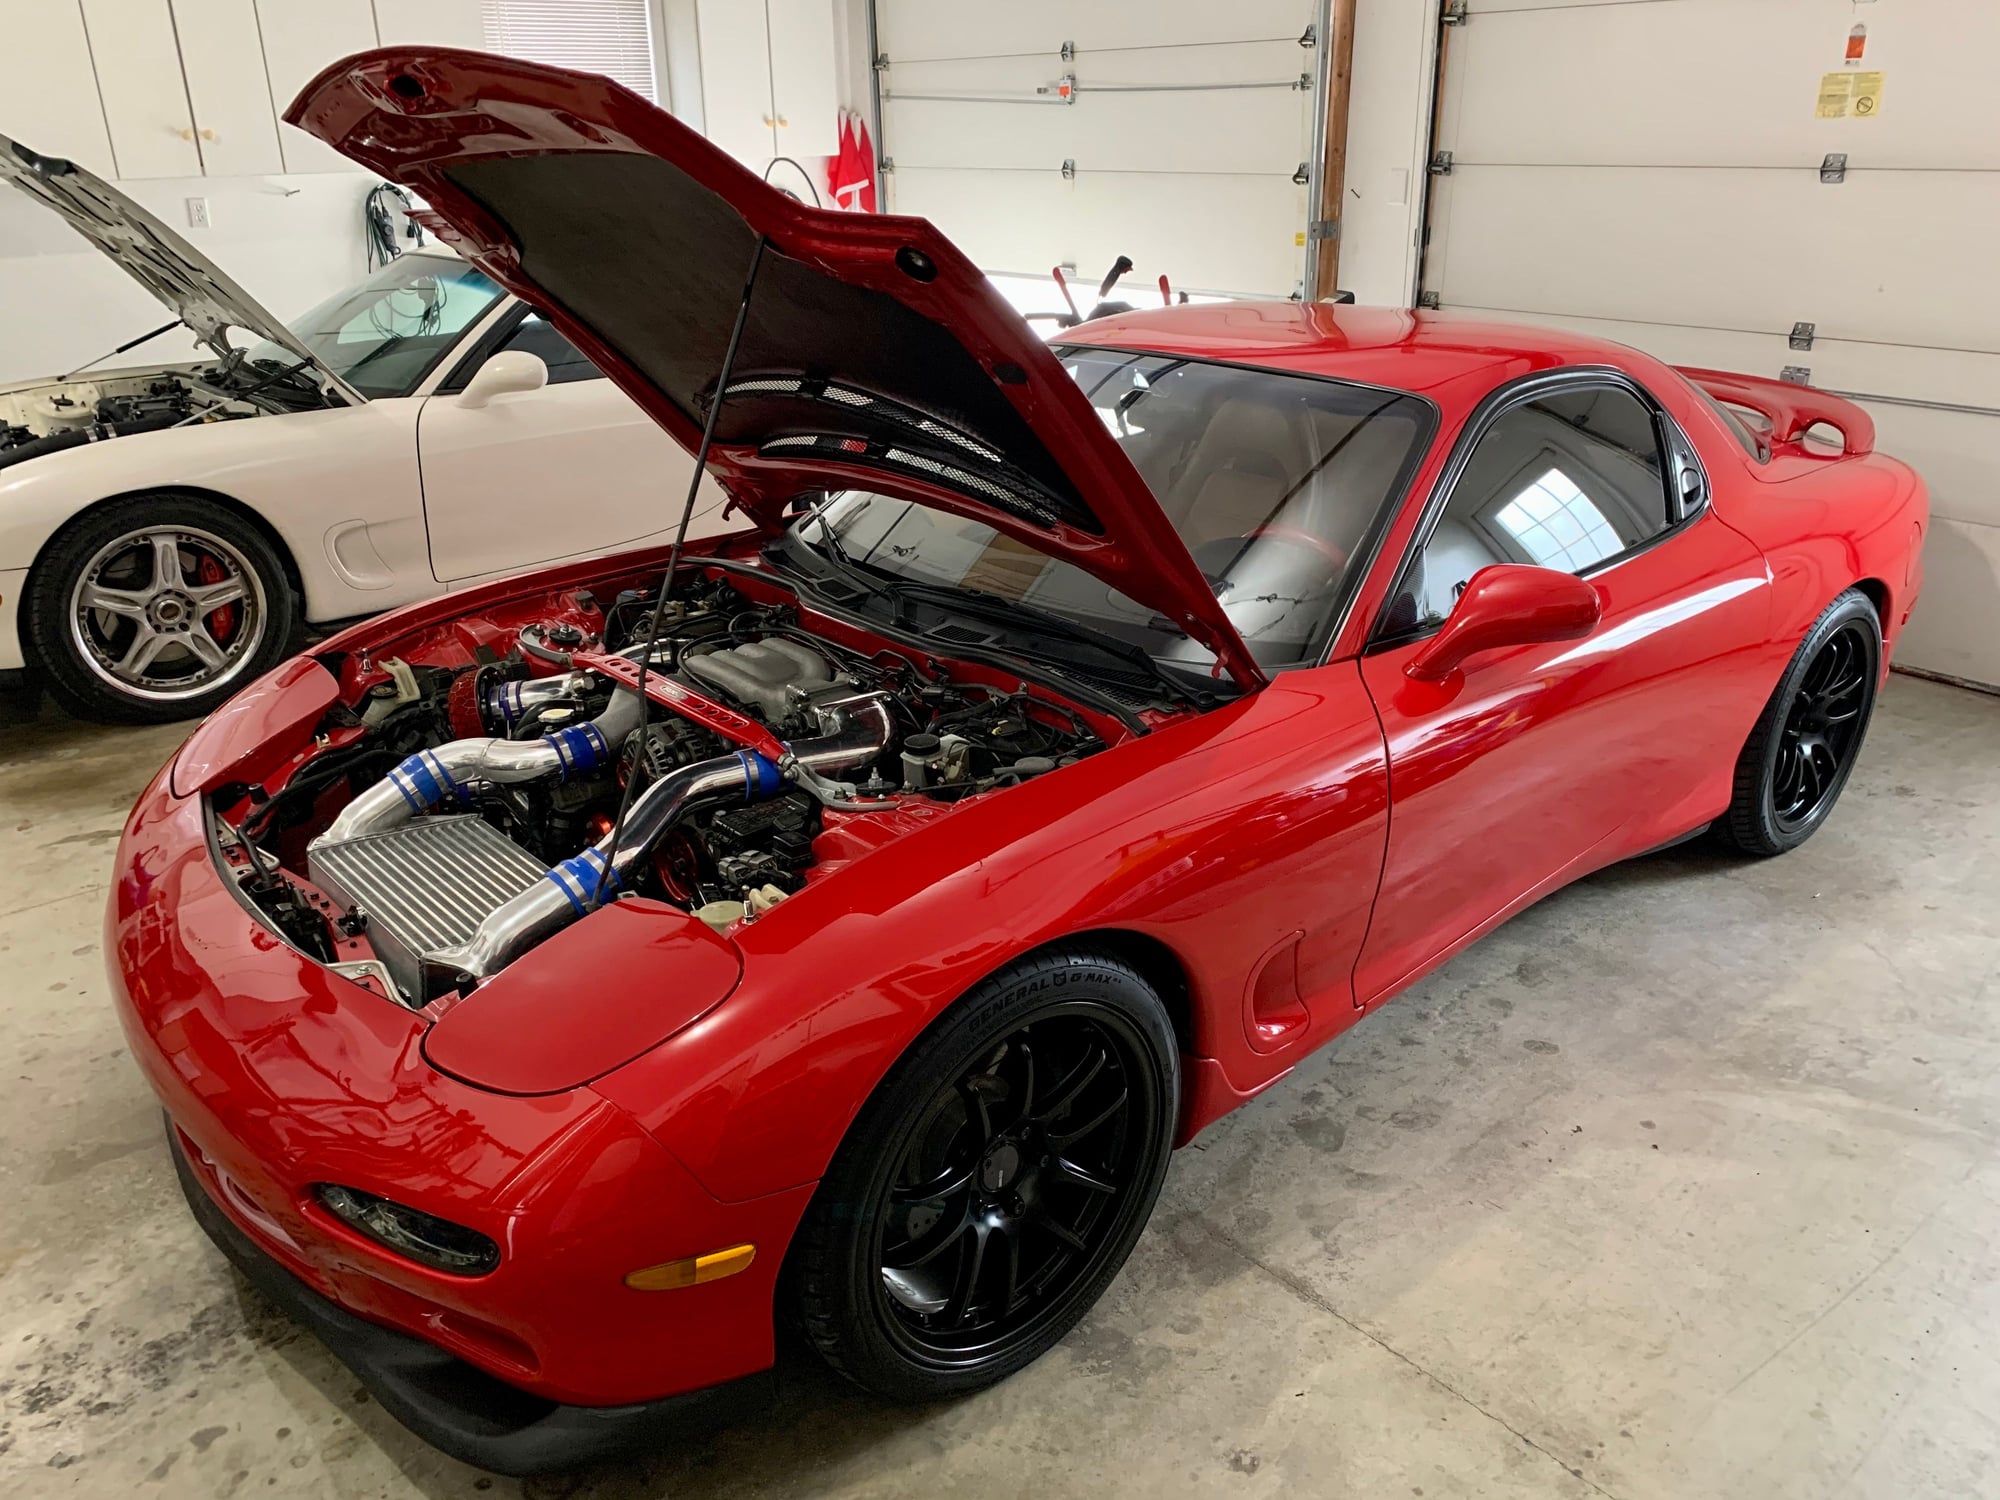 1993 Mazda RX-7 - *** 93 LHD Rx-7 Base w/ Leather, 5 speed, 52k miles, clean history *** - Used - VIN JM1FD3317P0209640 - 52,000 Miles - Other - 2WD - Manual - Coupe - Red - Allentown, PA 18031, United States